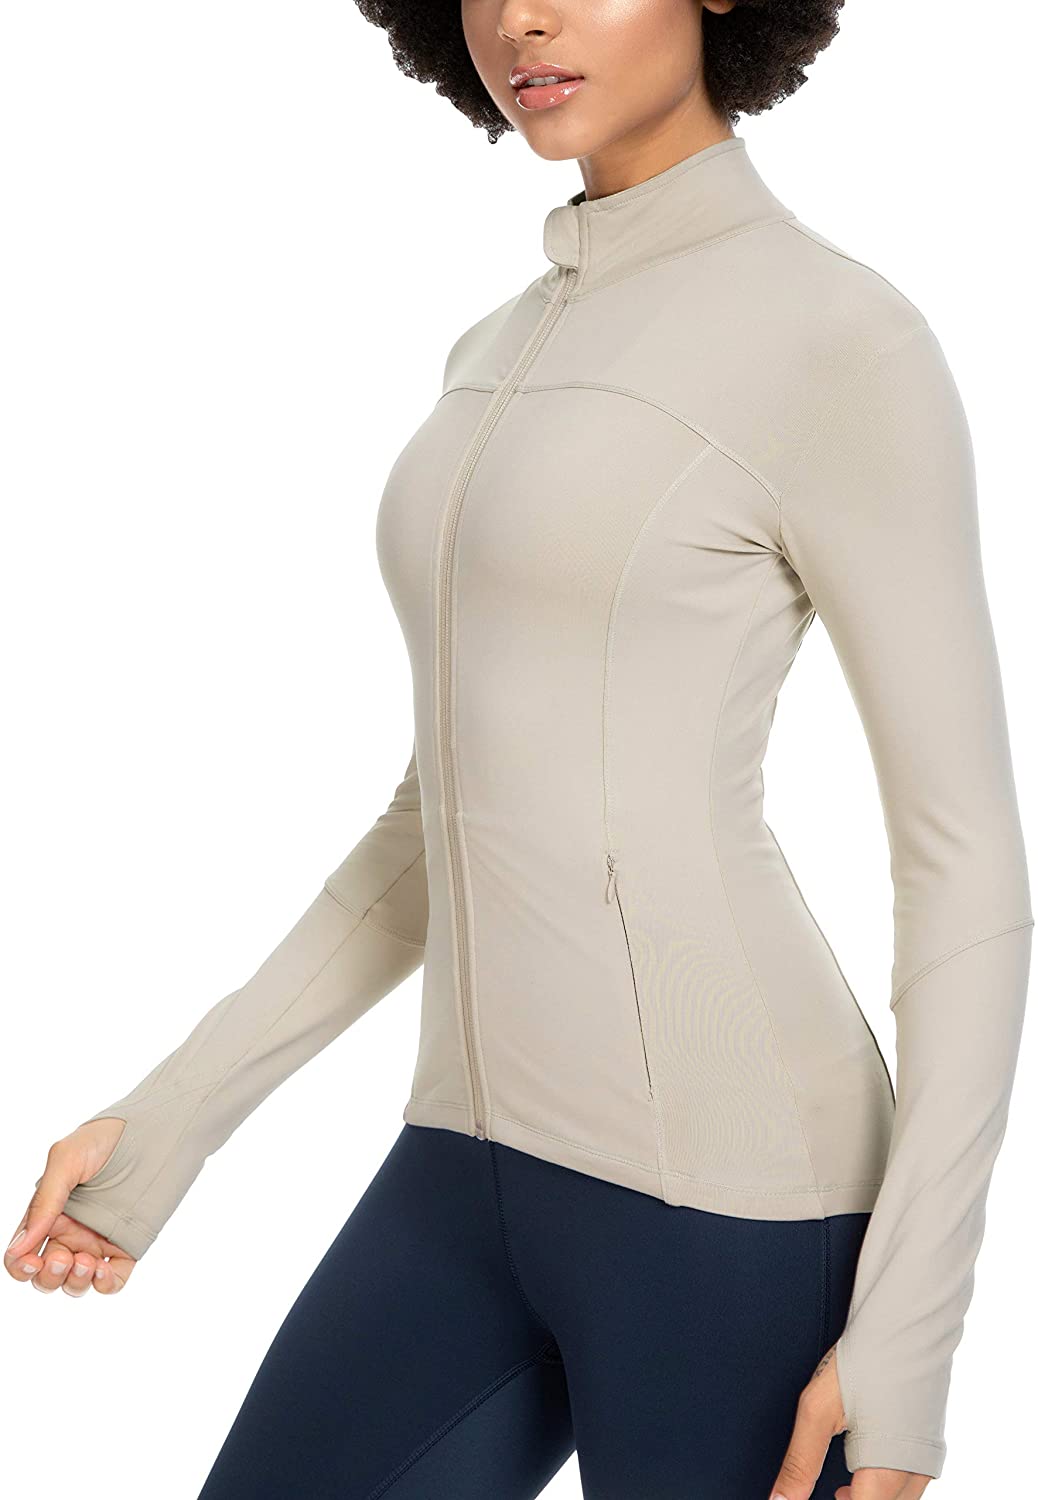  QUEENIEKE Crop Jackets For Women, Athletic Full Zip Up Jacket  Womens Slim Fit Running Jackets With Thumb Holes Beige XS : Clothing, Shoes  & Jewelry